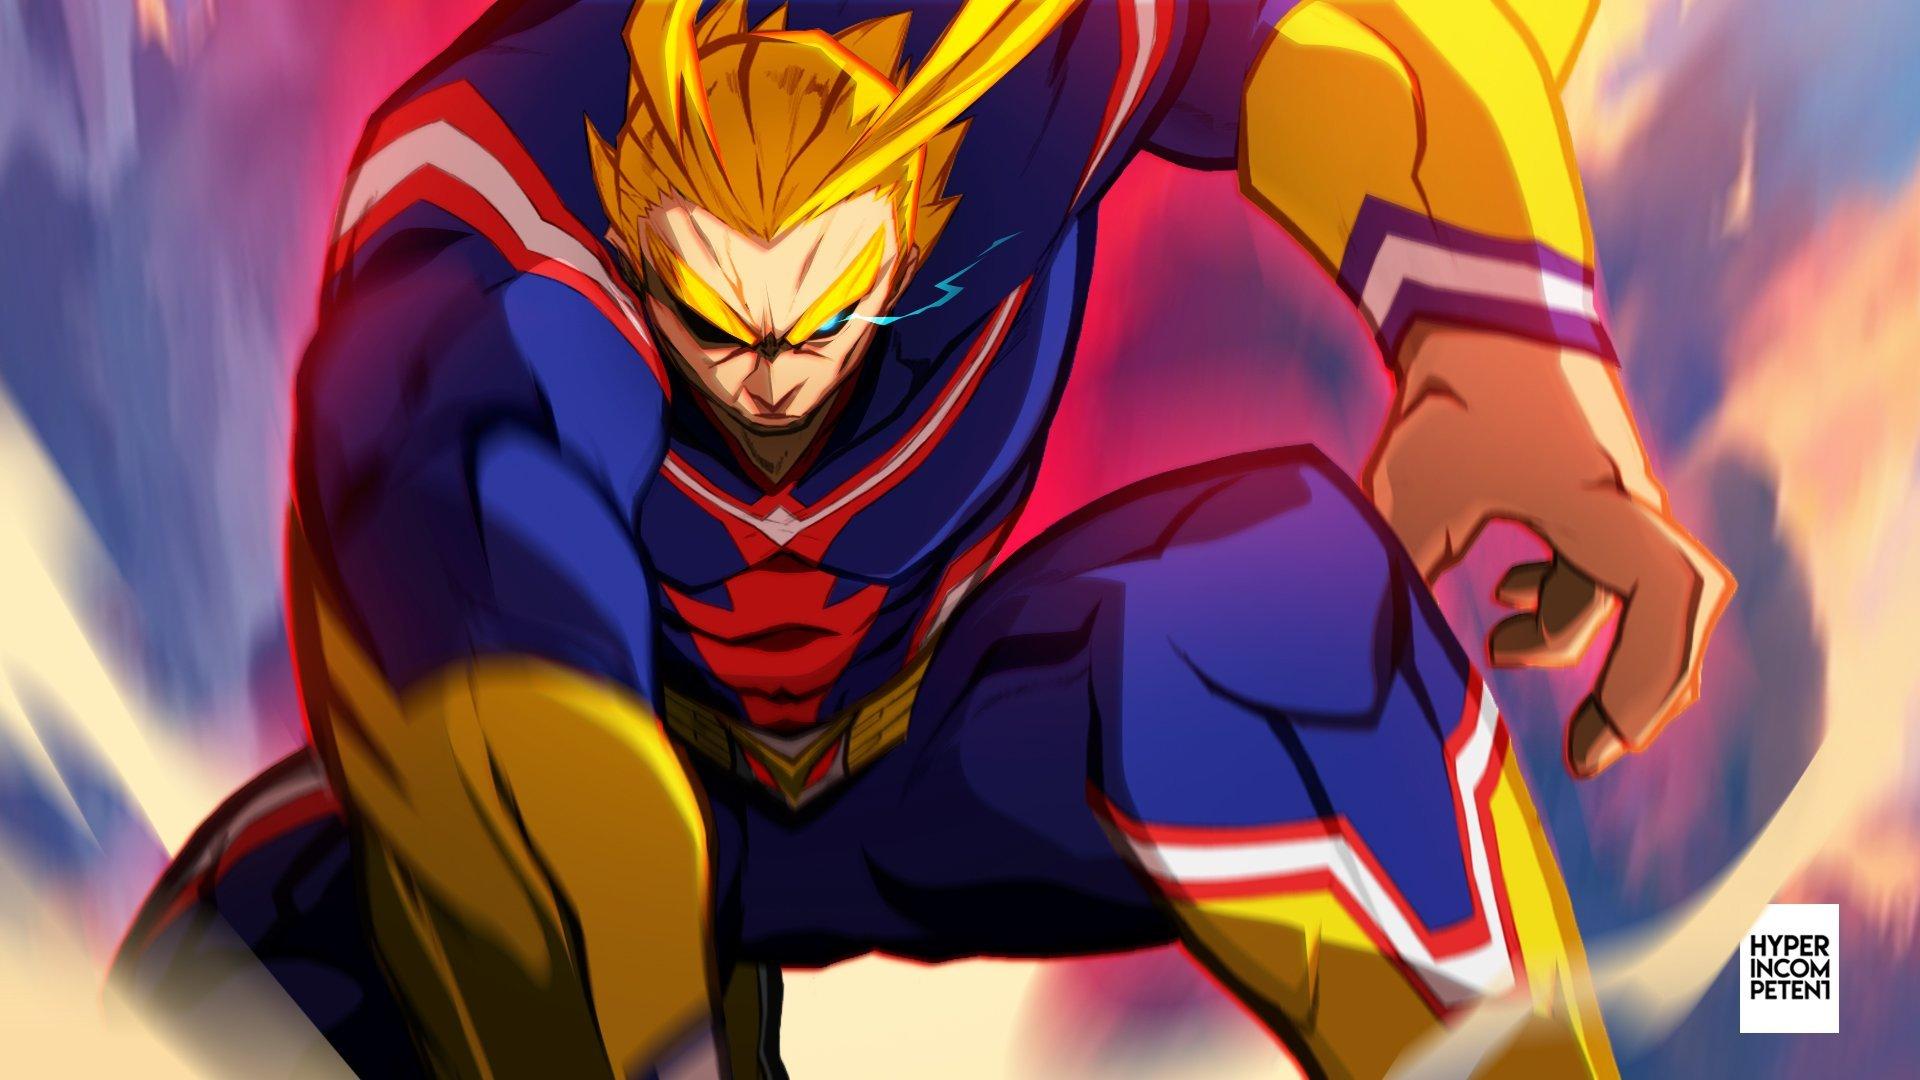 1920 x 1080 · jpeg - All Might Wallpaper - HD Backgrounds for Phone and Desktop